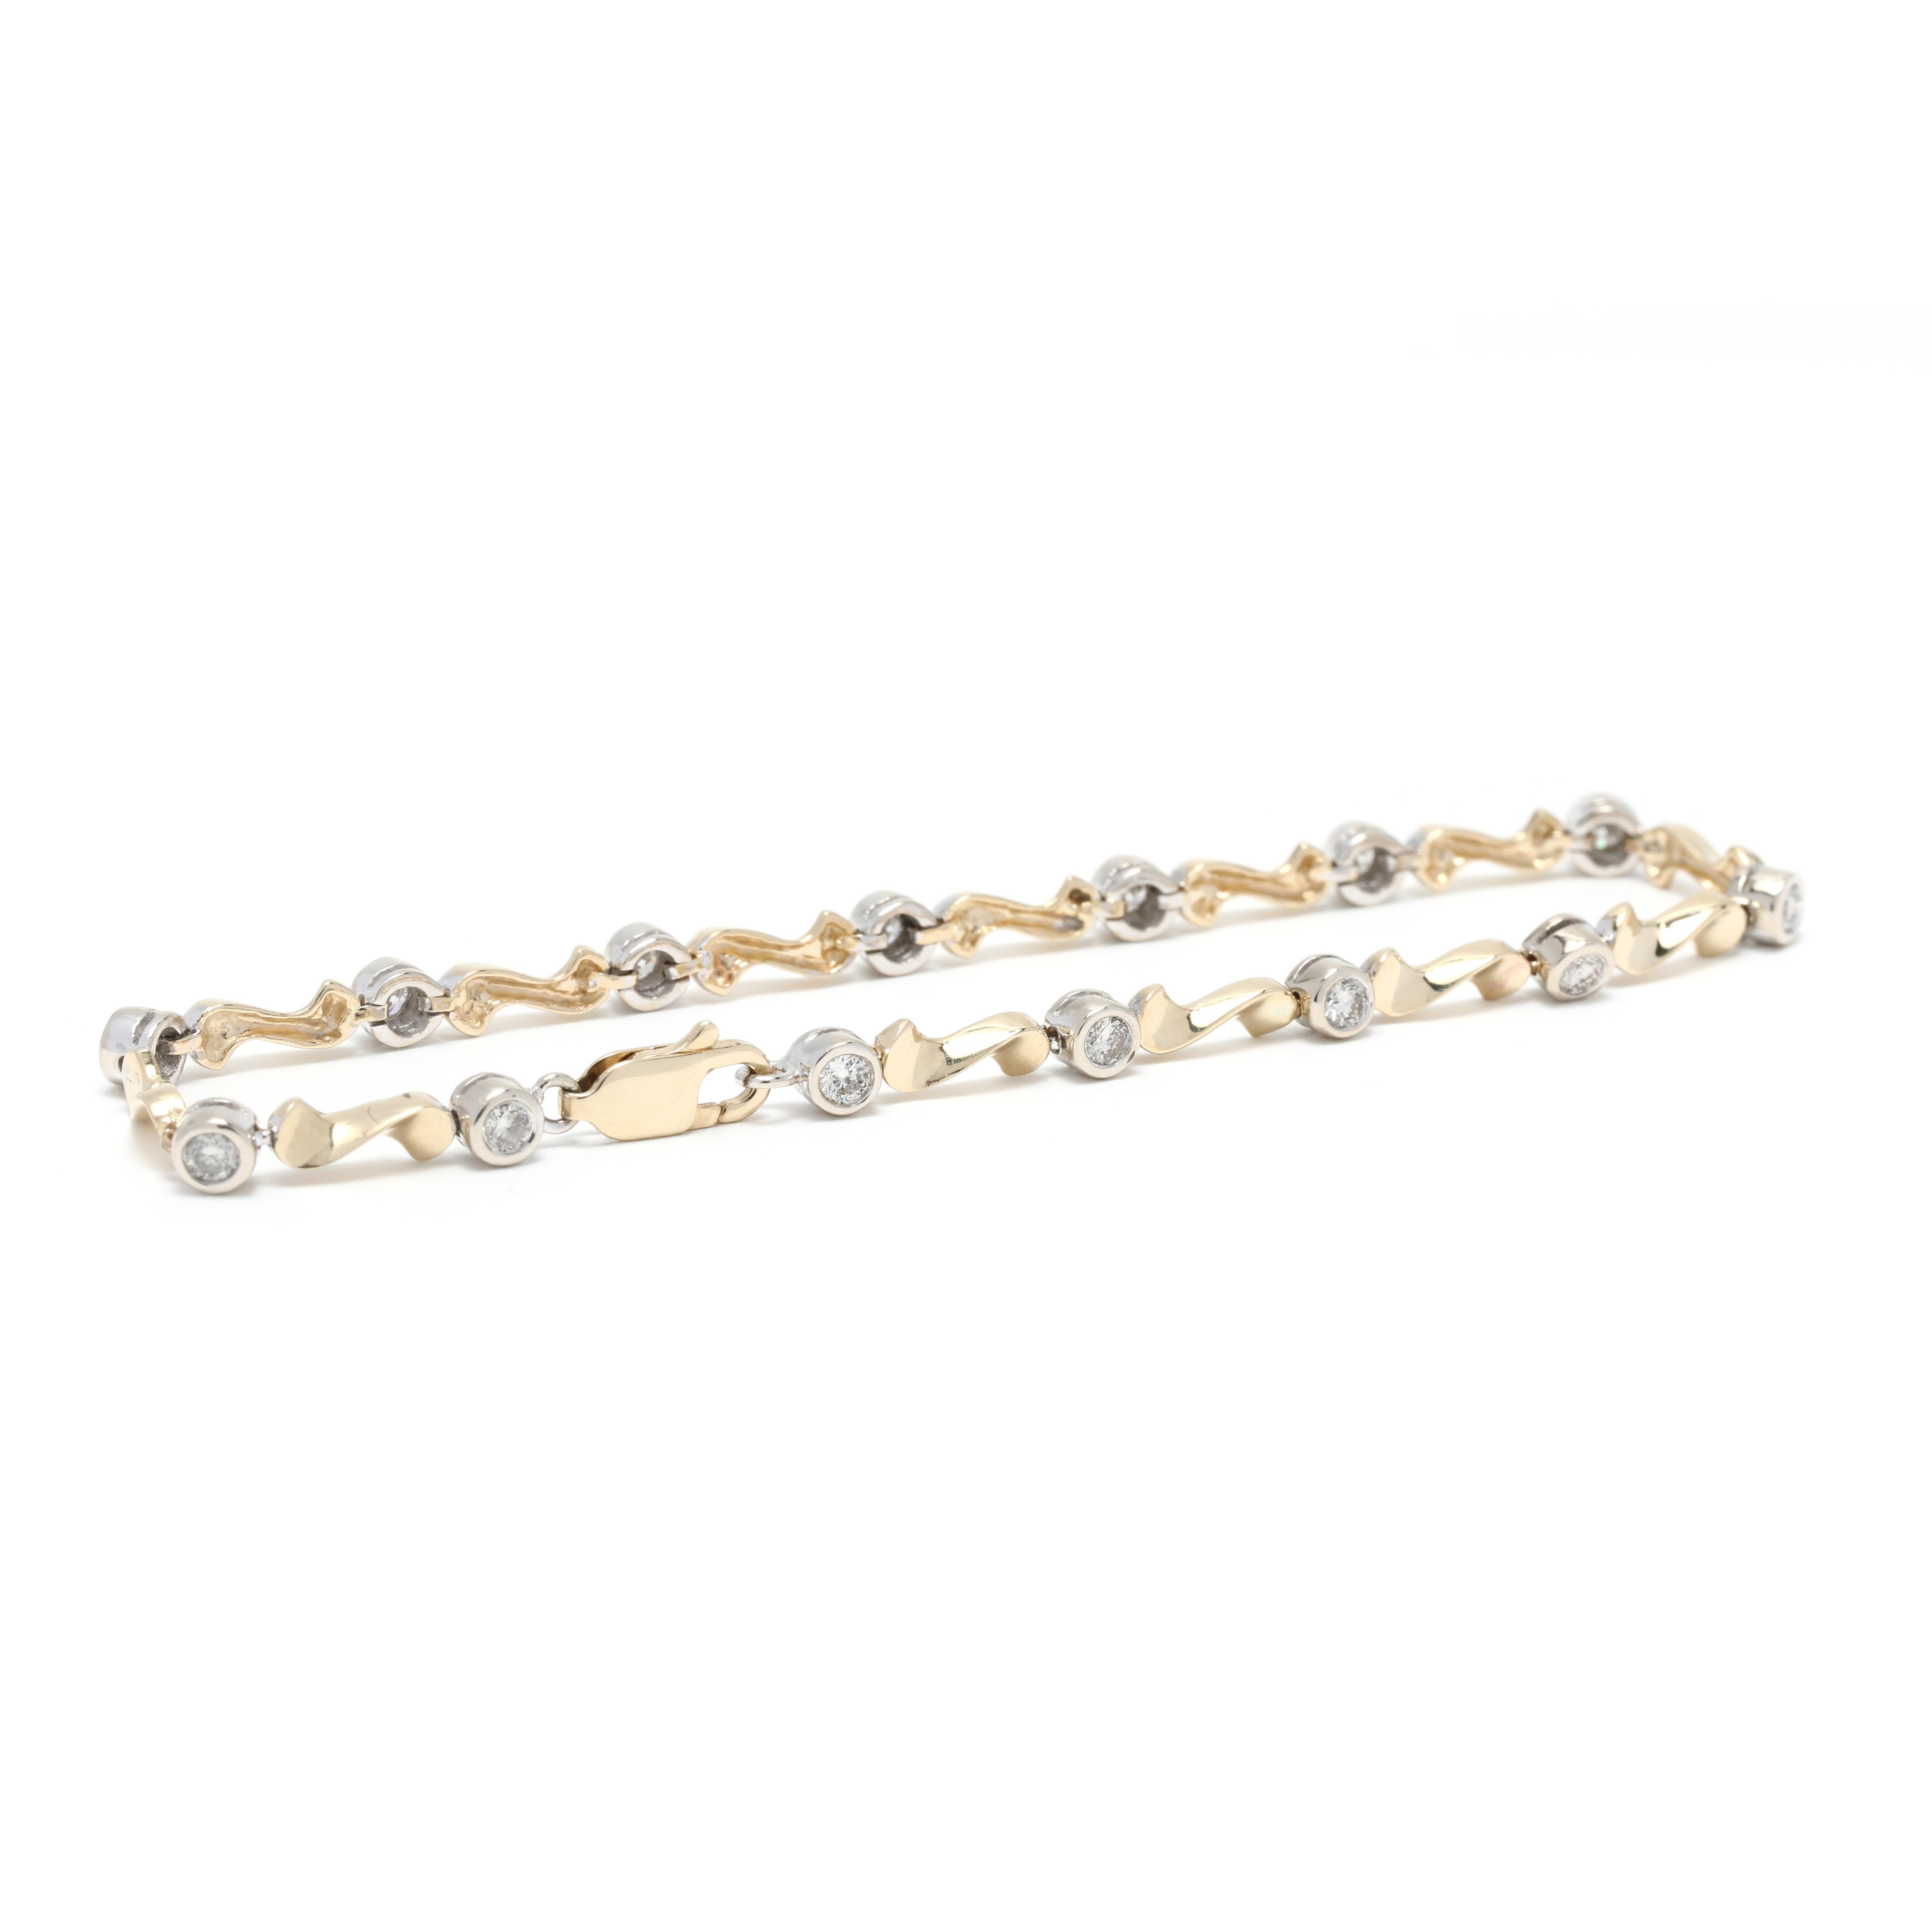 This exquisite 1 carat total weight Swirl Diamond Bracelet is crafted in 14K yellow gold, with a length of 7 inches. This Fancy Diamond Tennis Bracelet features a brilliant arrangement of diamonds that shimmer and sparkle. Perfect for special